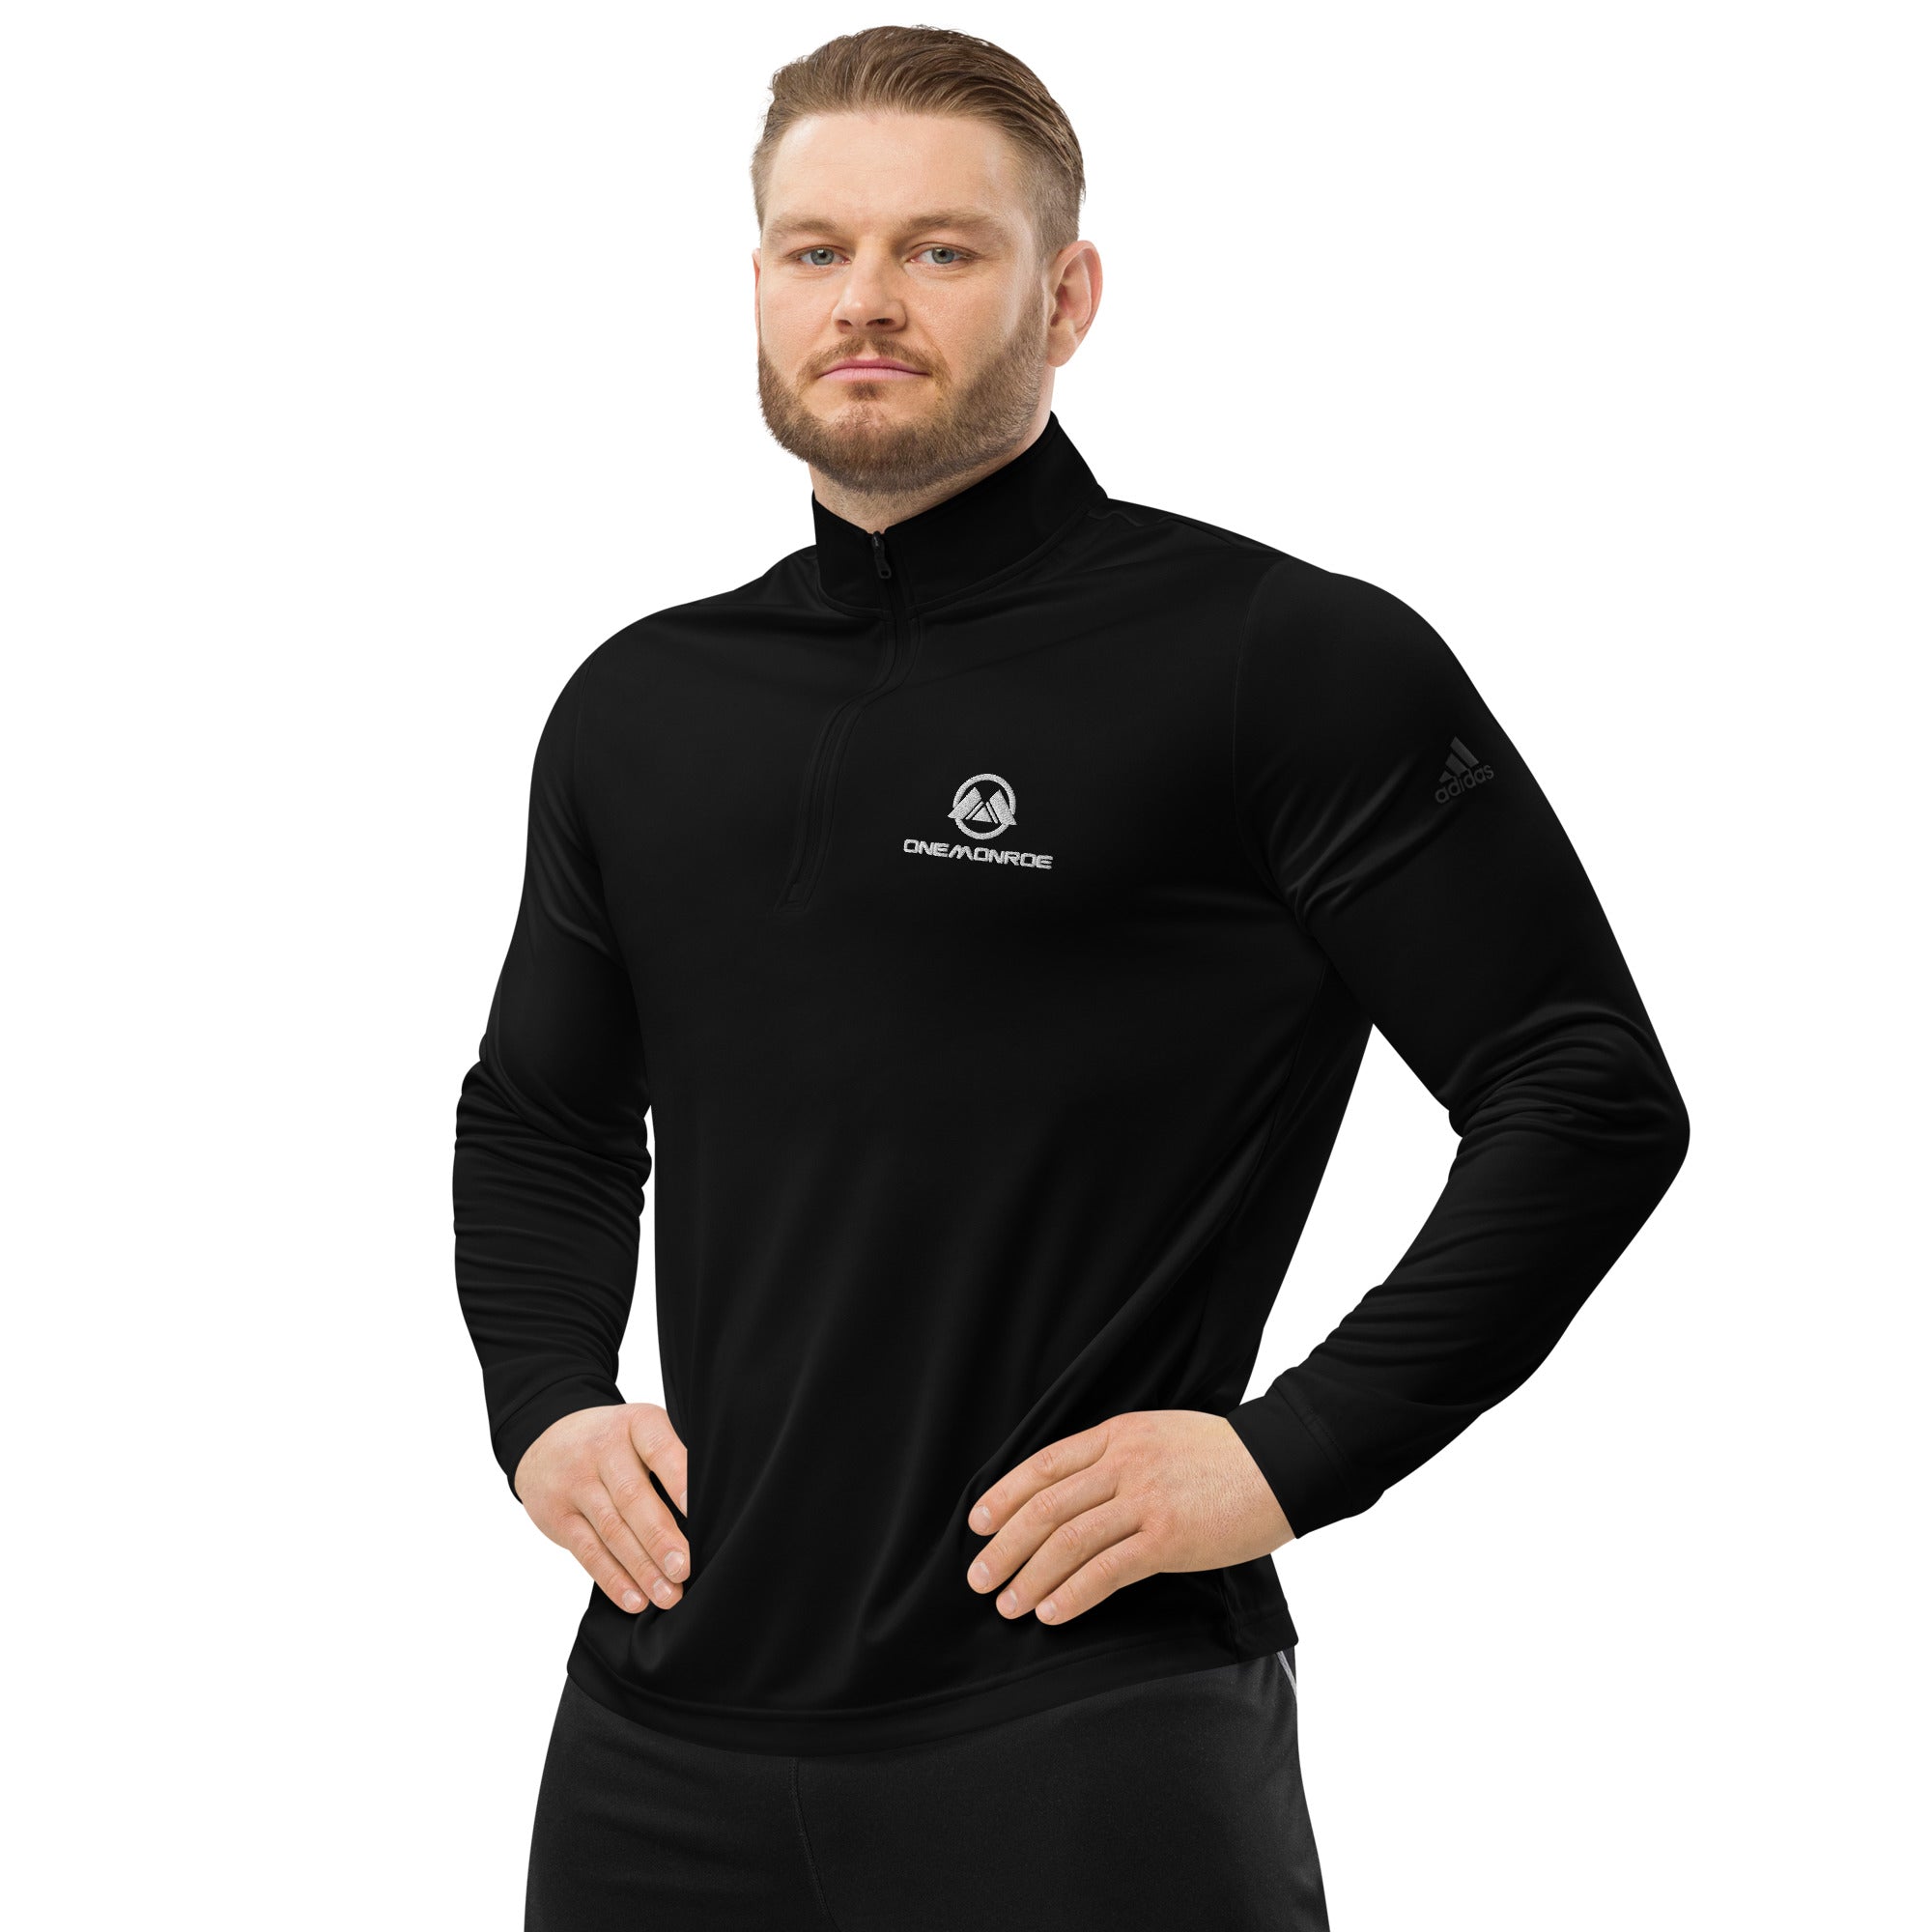 Adidas Quarter zip pullover - Mens- More colors available